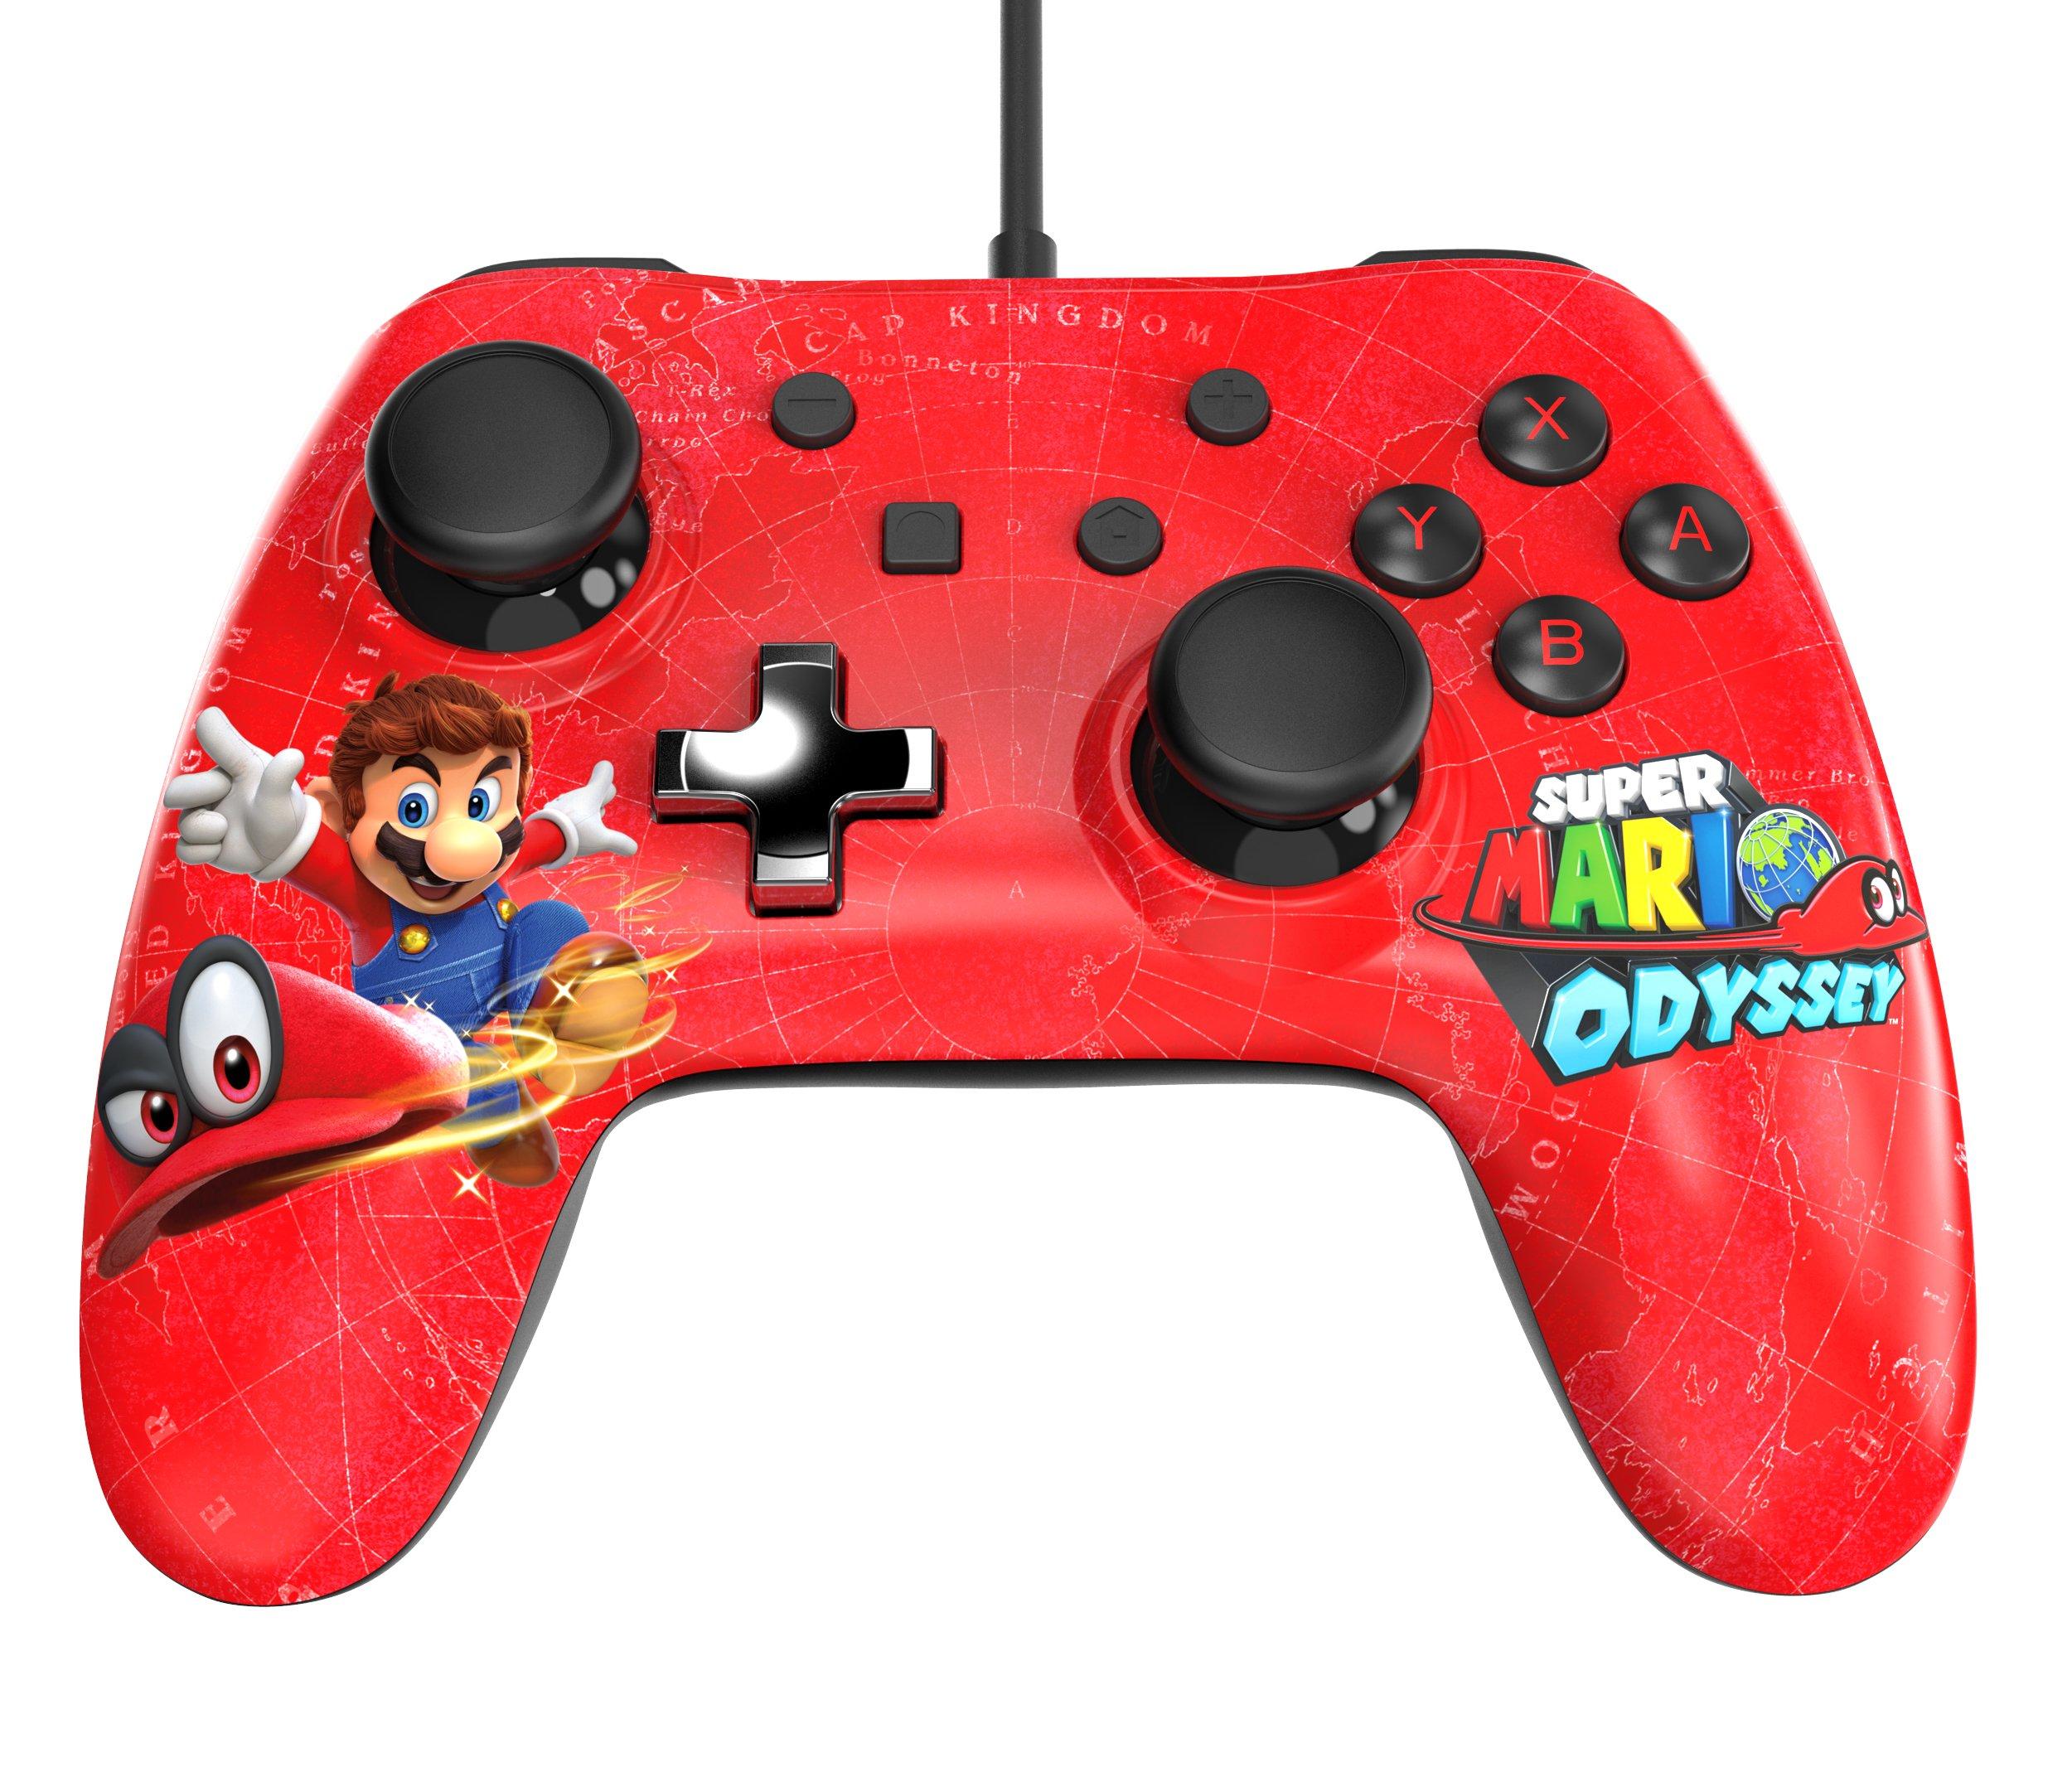 mario odyssey for the nintendo switch